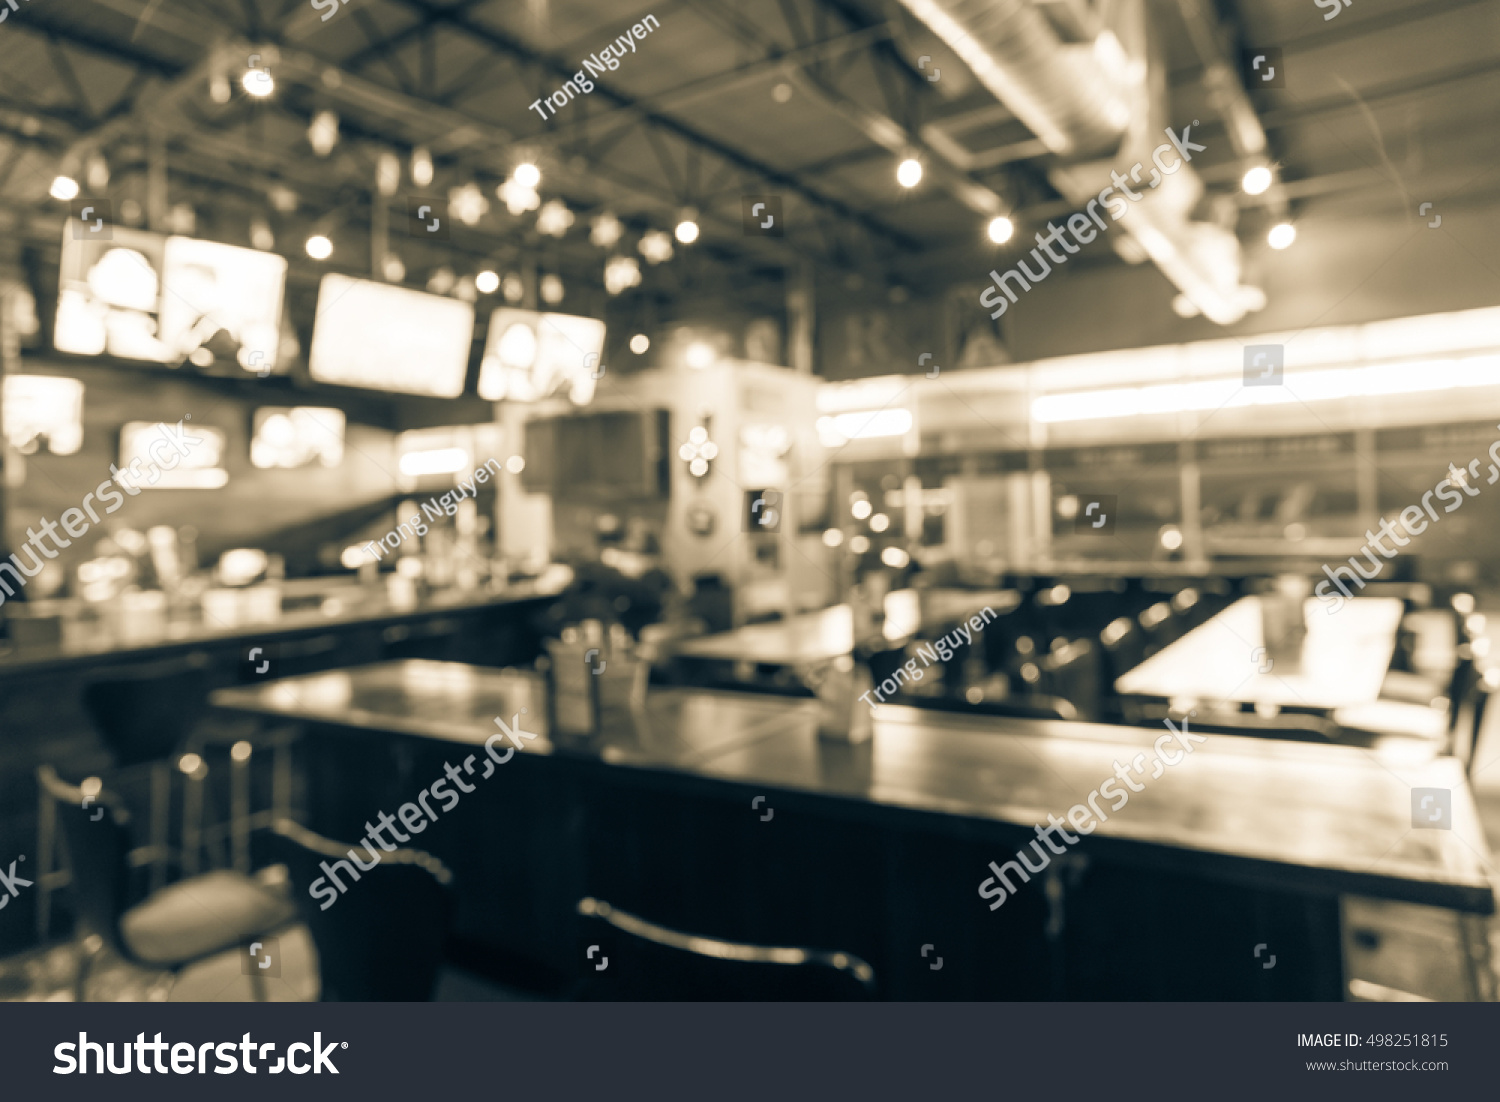 Blurred Image Sport Oyster Bar Tv Stock Photo Edit Now 498251815